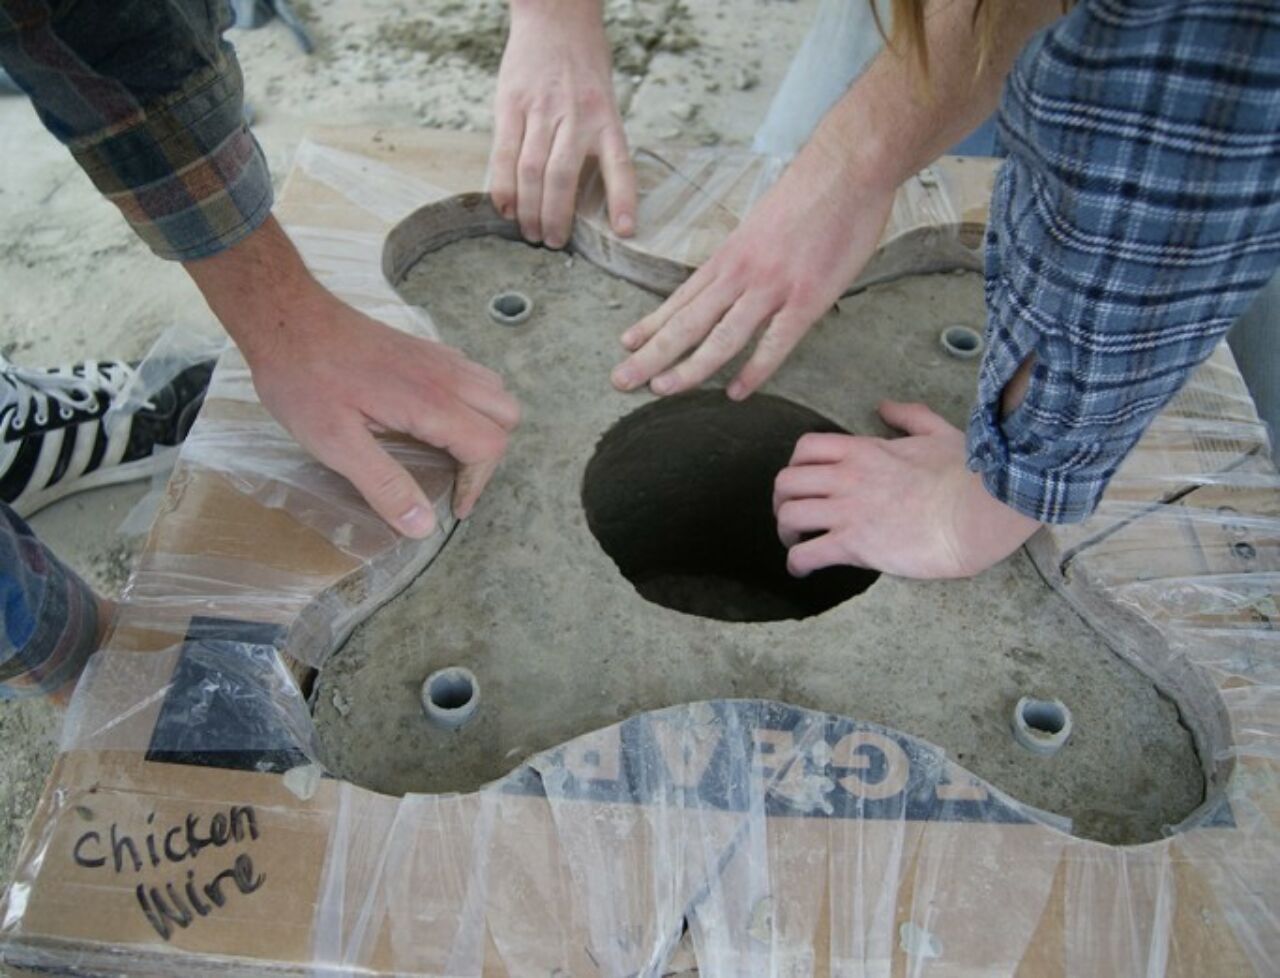 Students' hands working on a wooden and plastic concrete casting mold.